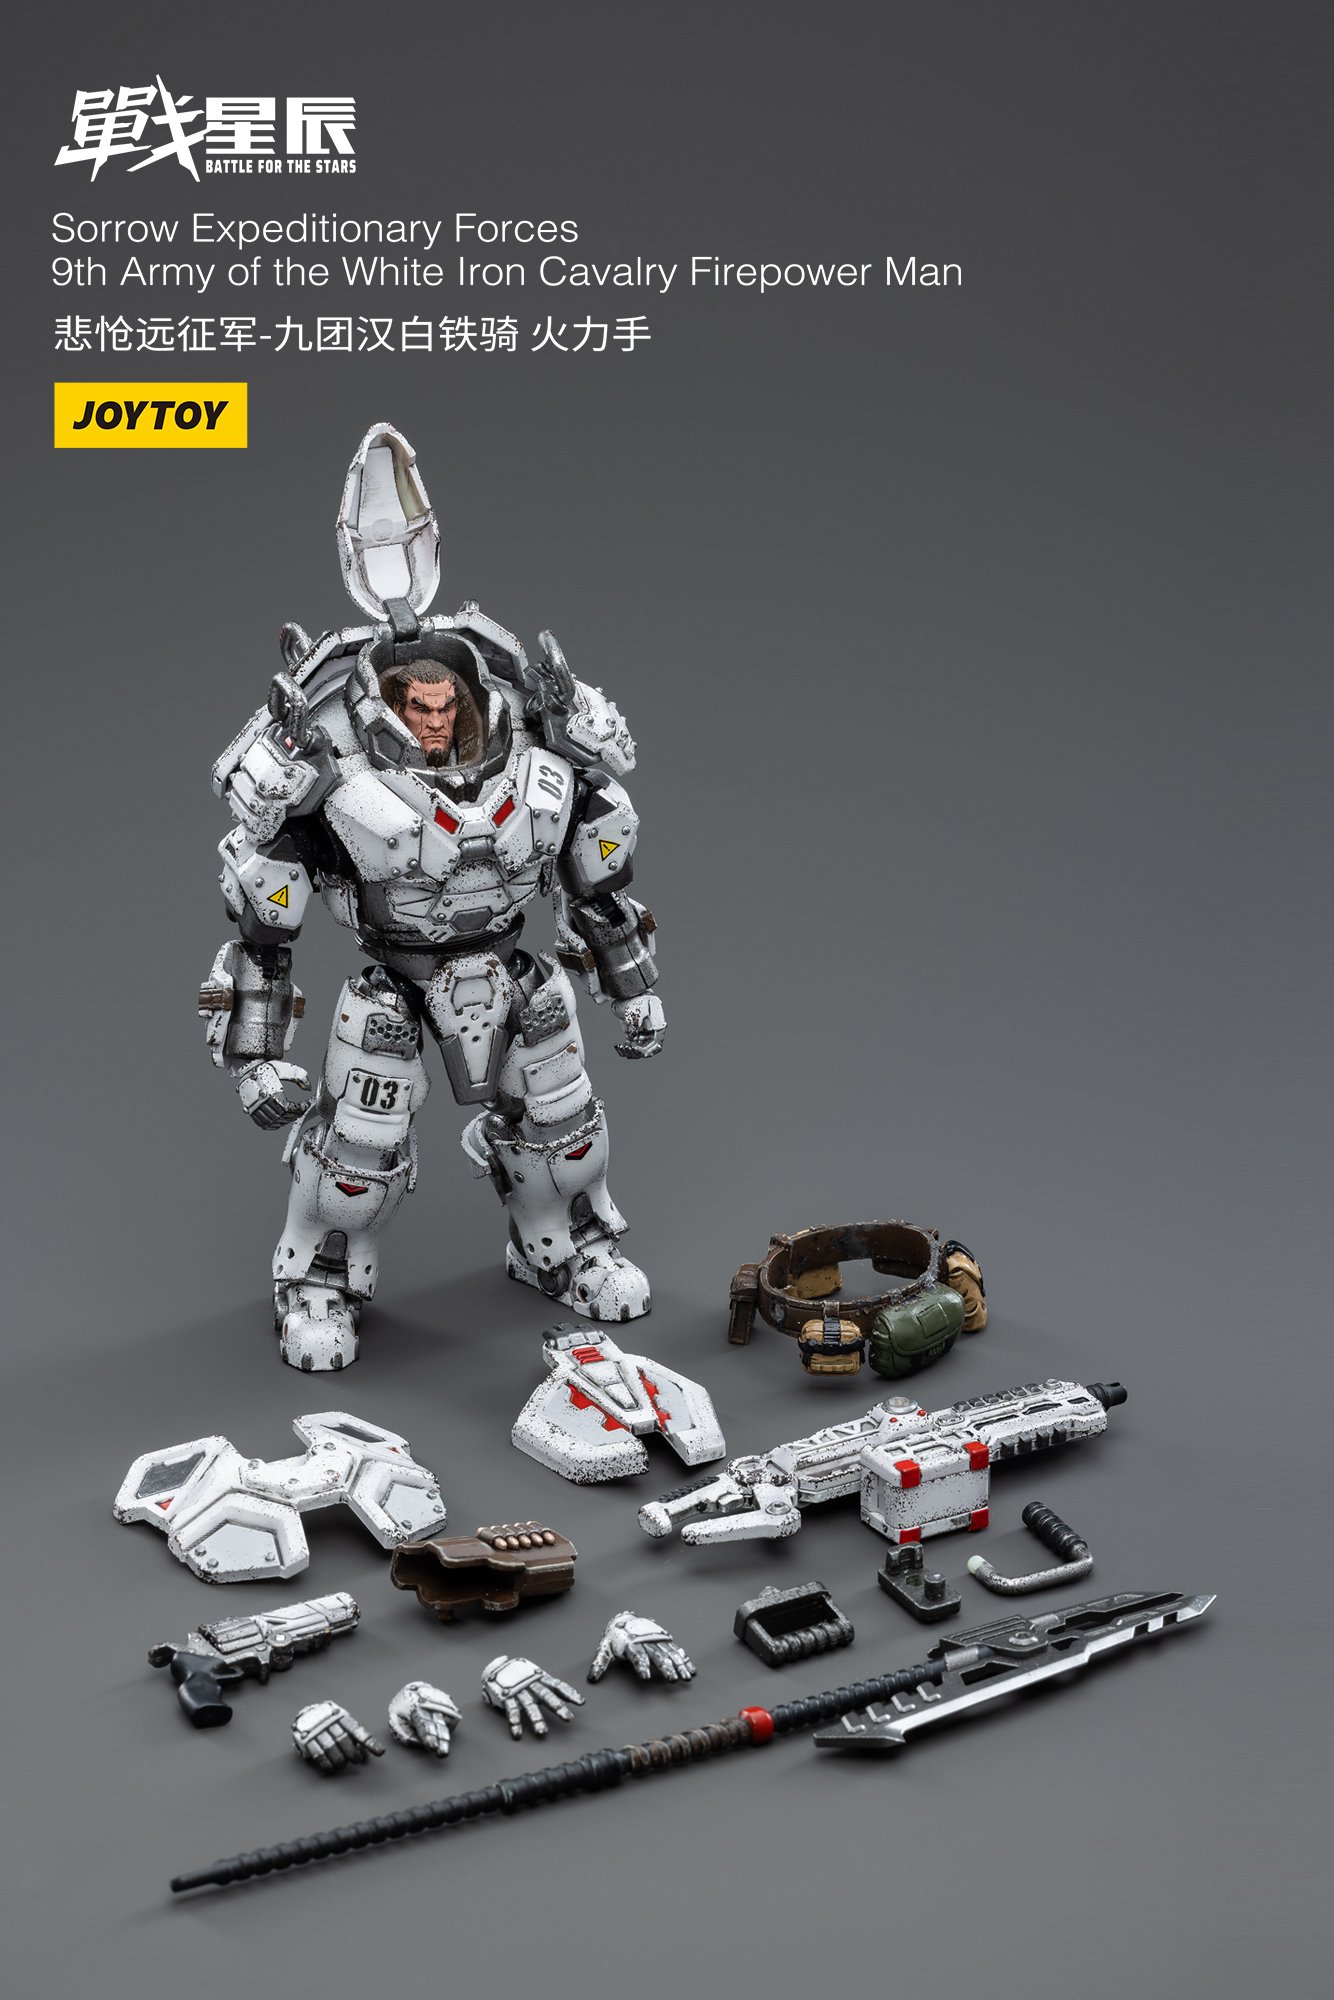 JoyToy Action Figure Battle For The Star Sorrow Expeditionary Forces 9th Army of the White Iron Cavalry Firepower Man